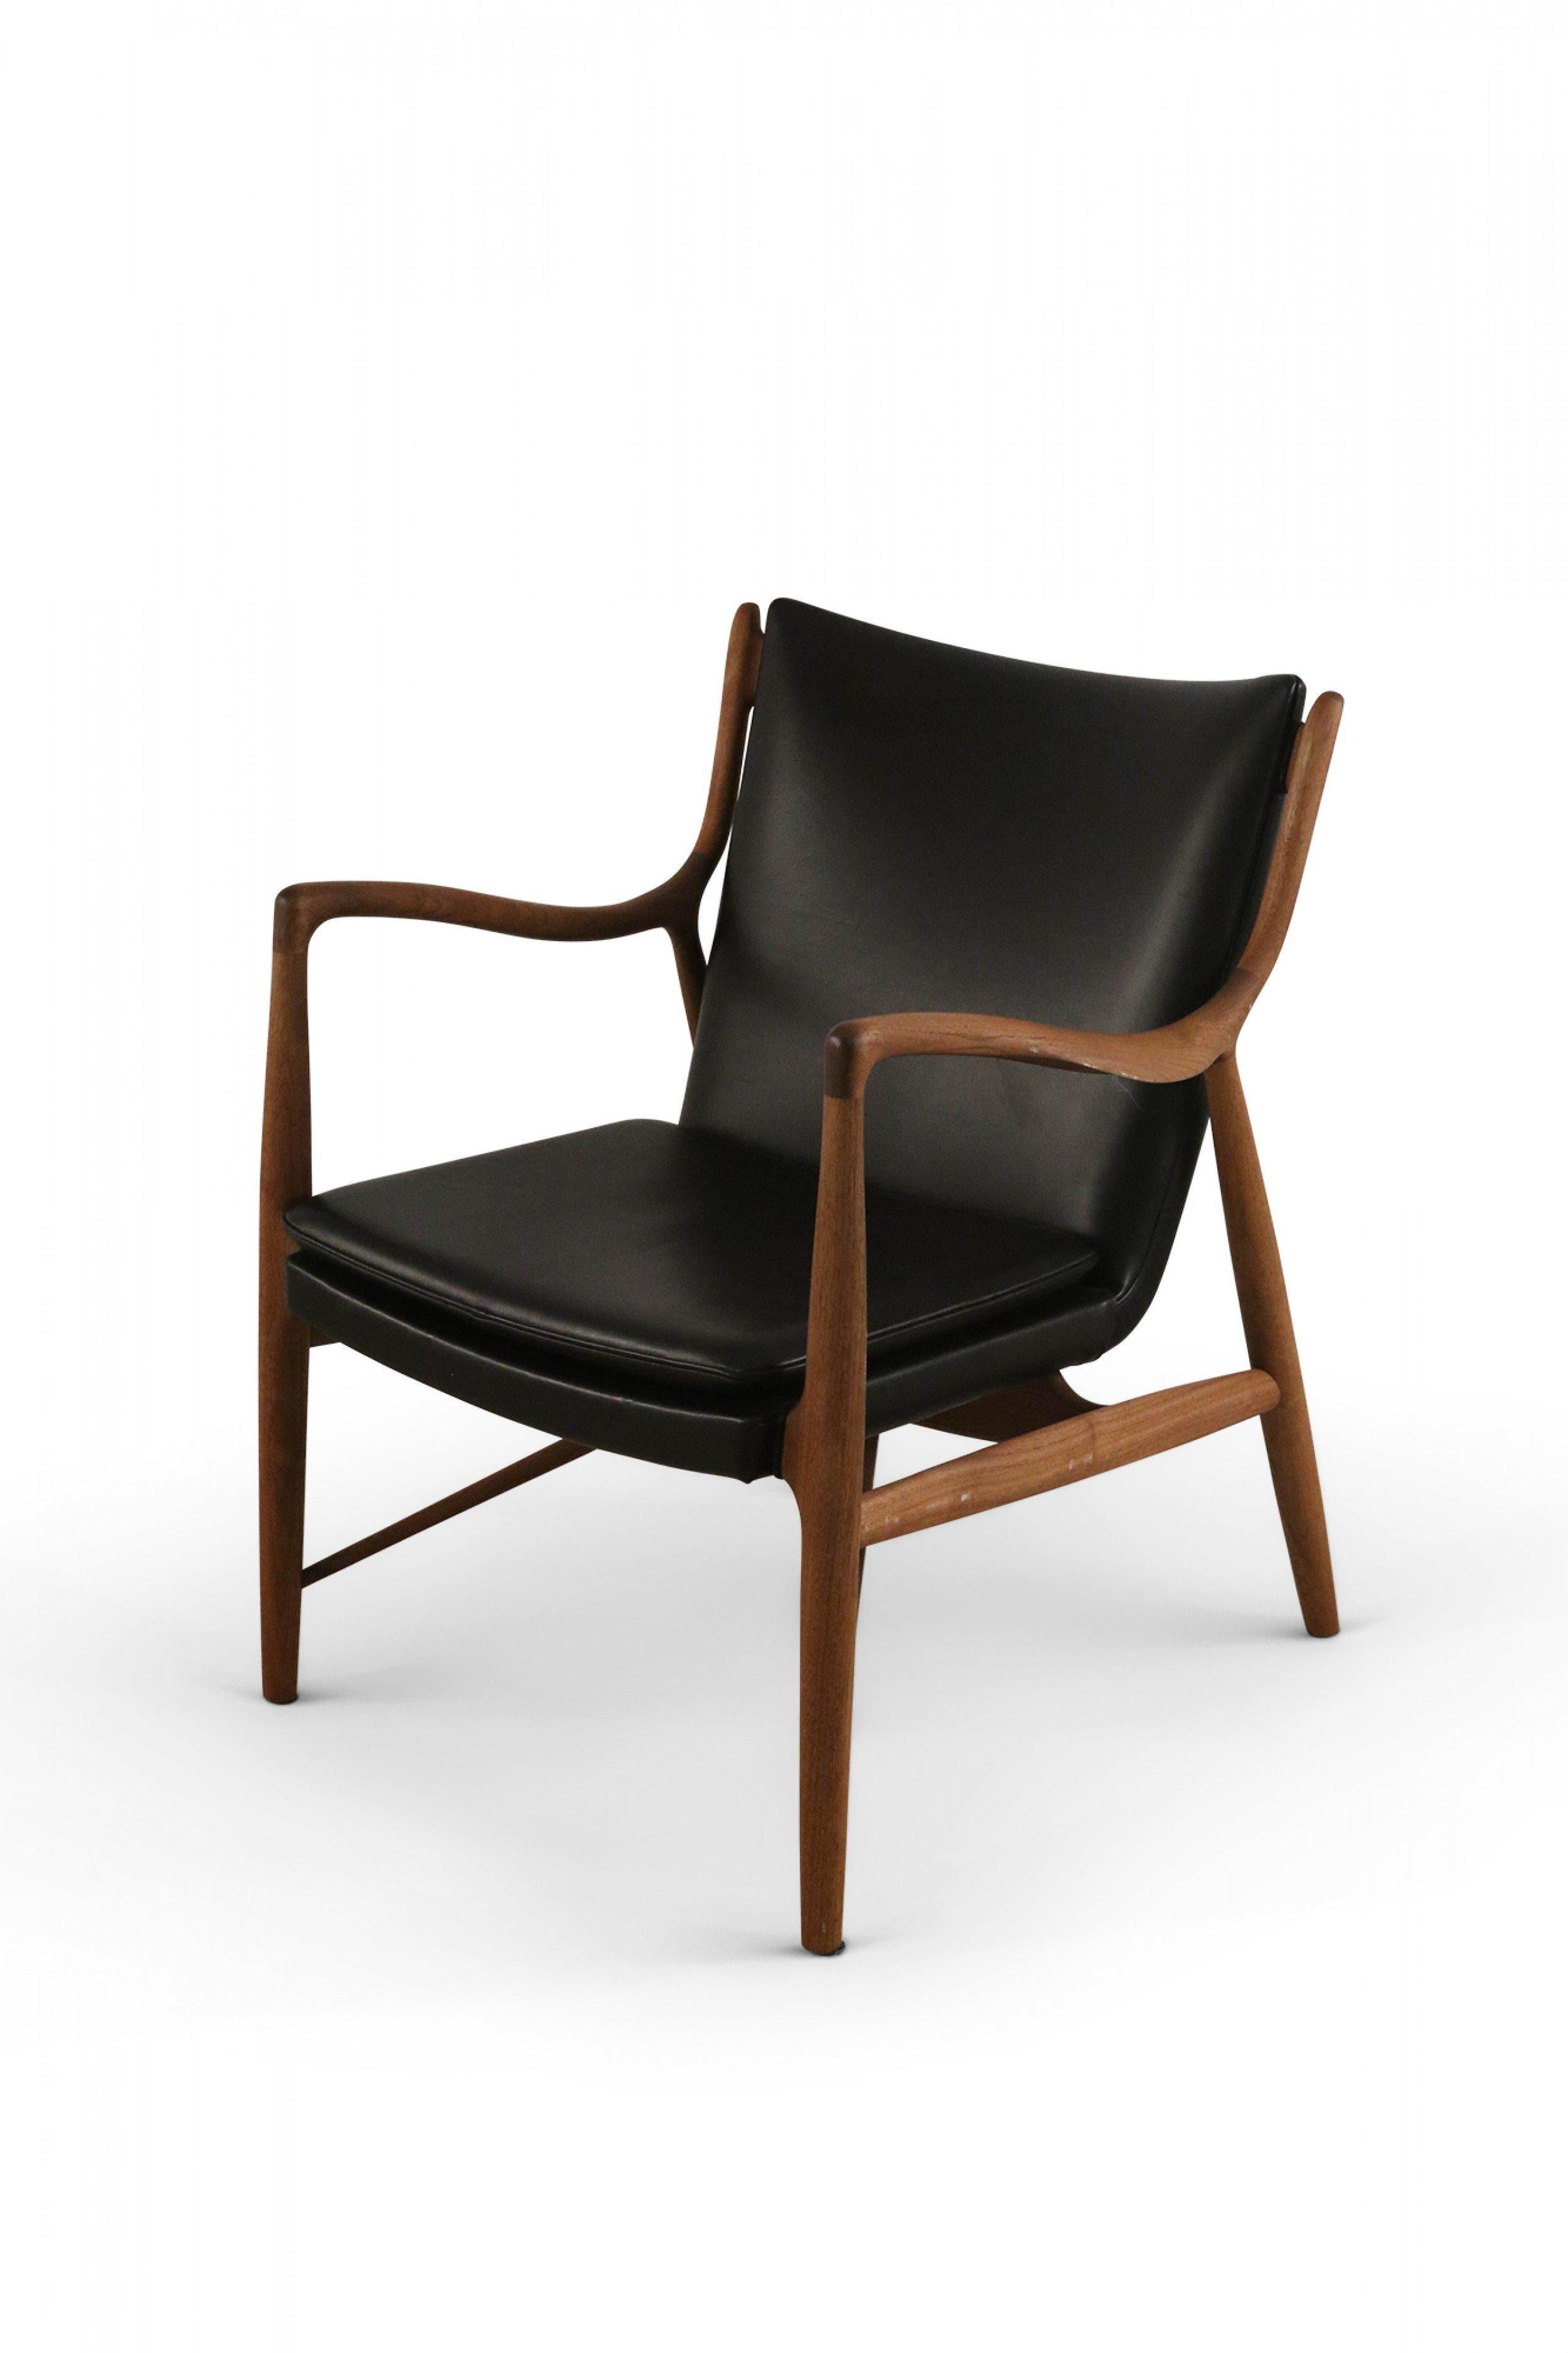 Pair of mid-century Danish armchairs with teak wood frames and black leather seats (FINN JUHL-model 45) (PRICED AS PAIR).
 